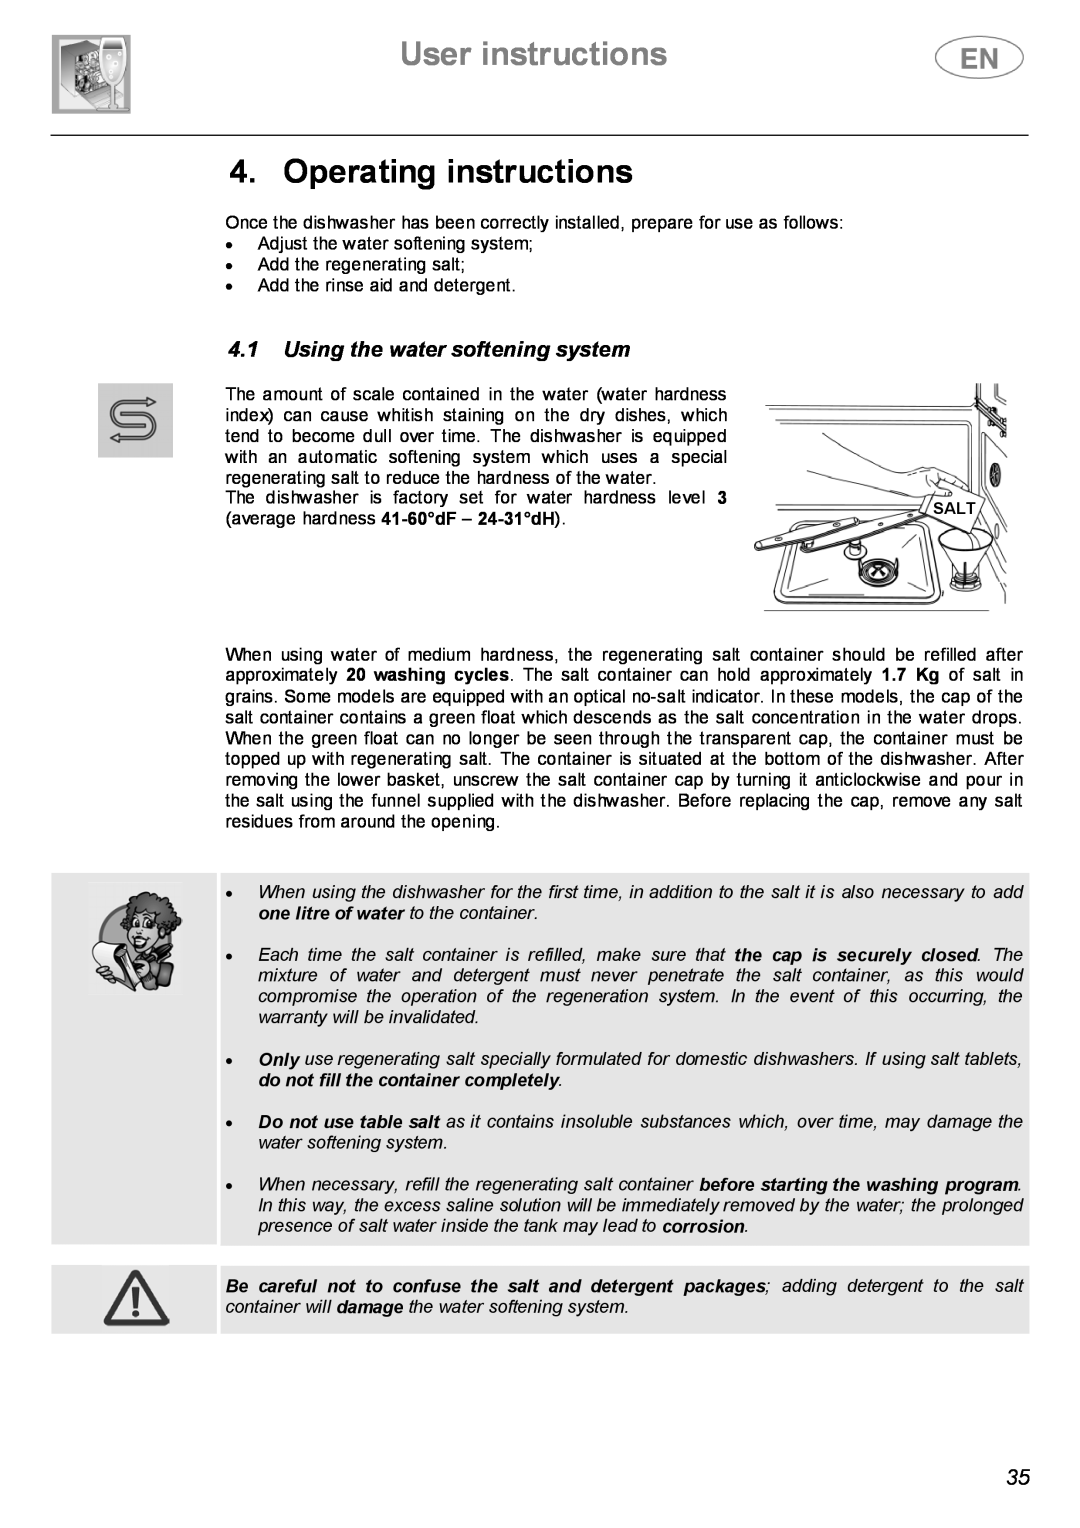 Smeg DWF614SS, DWF614WH manual Operating instructions, User instructions, Using the water softening system 